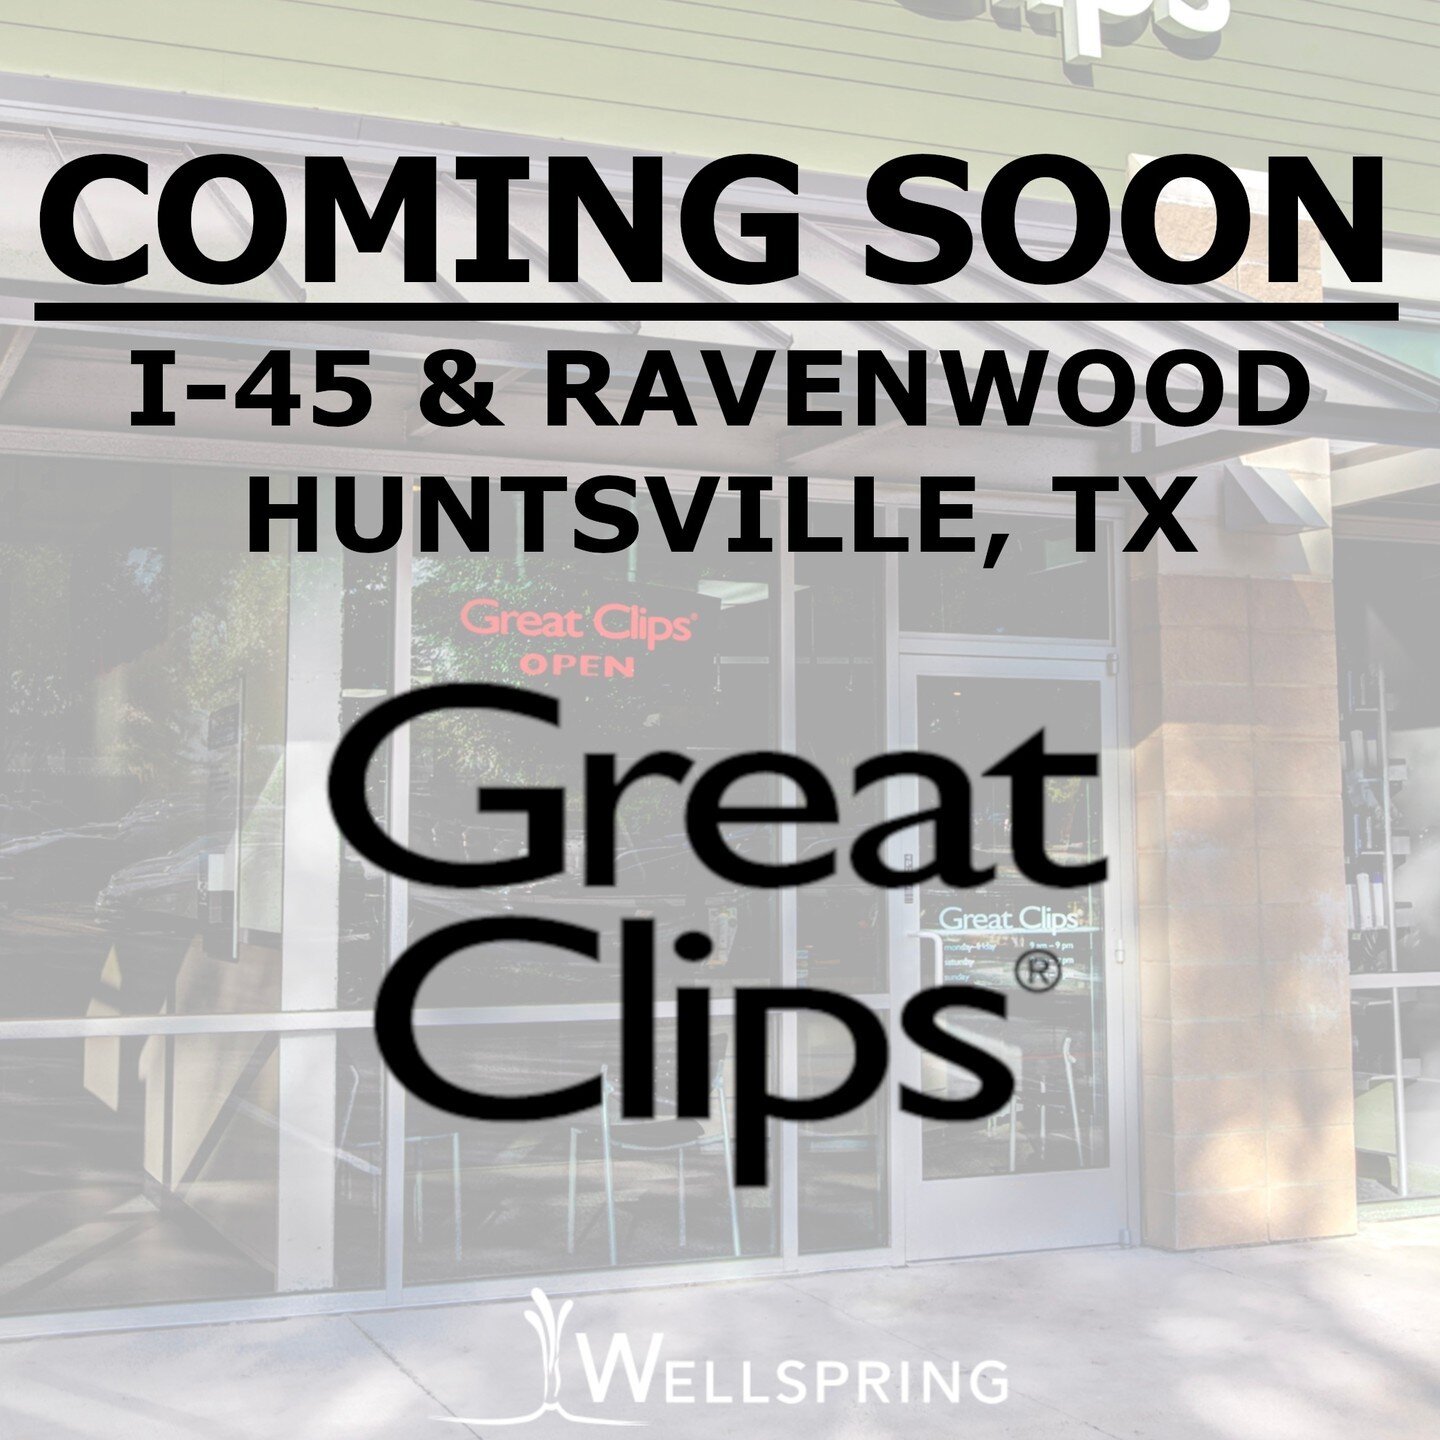 Great Clips continues to stretch out and reach into new markets - headed northward and adding a new salon in Huntsville, Texas by the Kroger at I-45 &amp; Ravenwood!

Clay Trozzo with Property Commerce represented the Landlord, and Marshall C. Bumpus